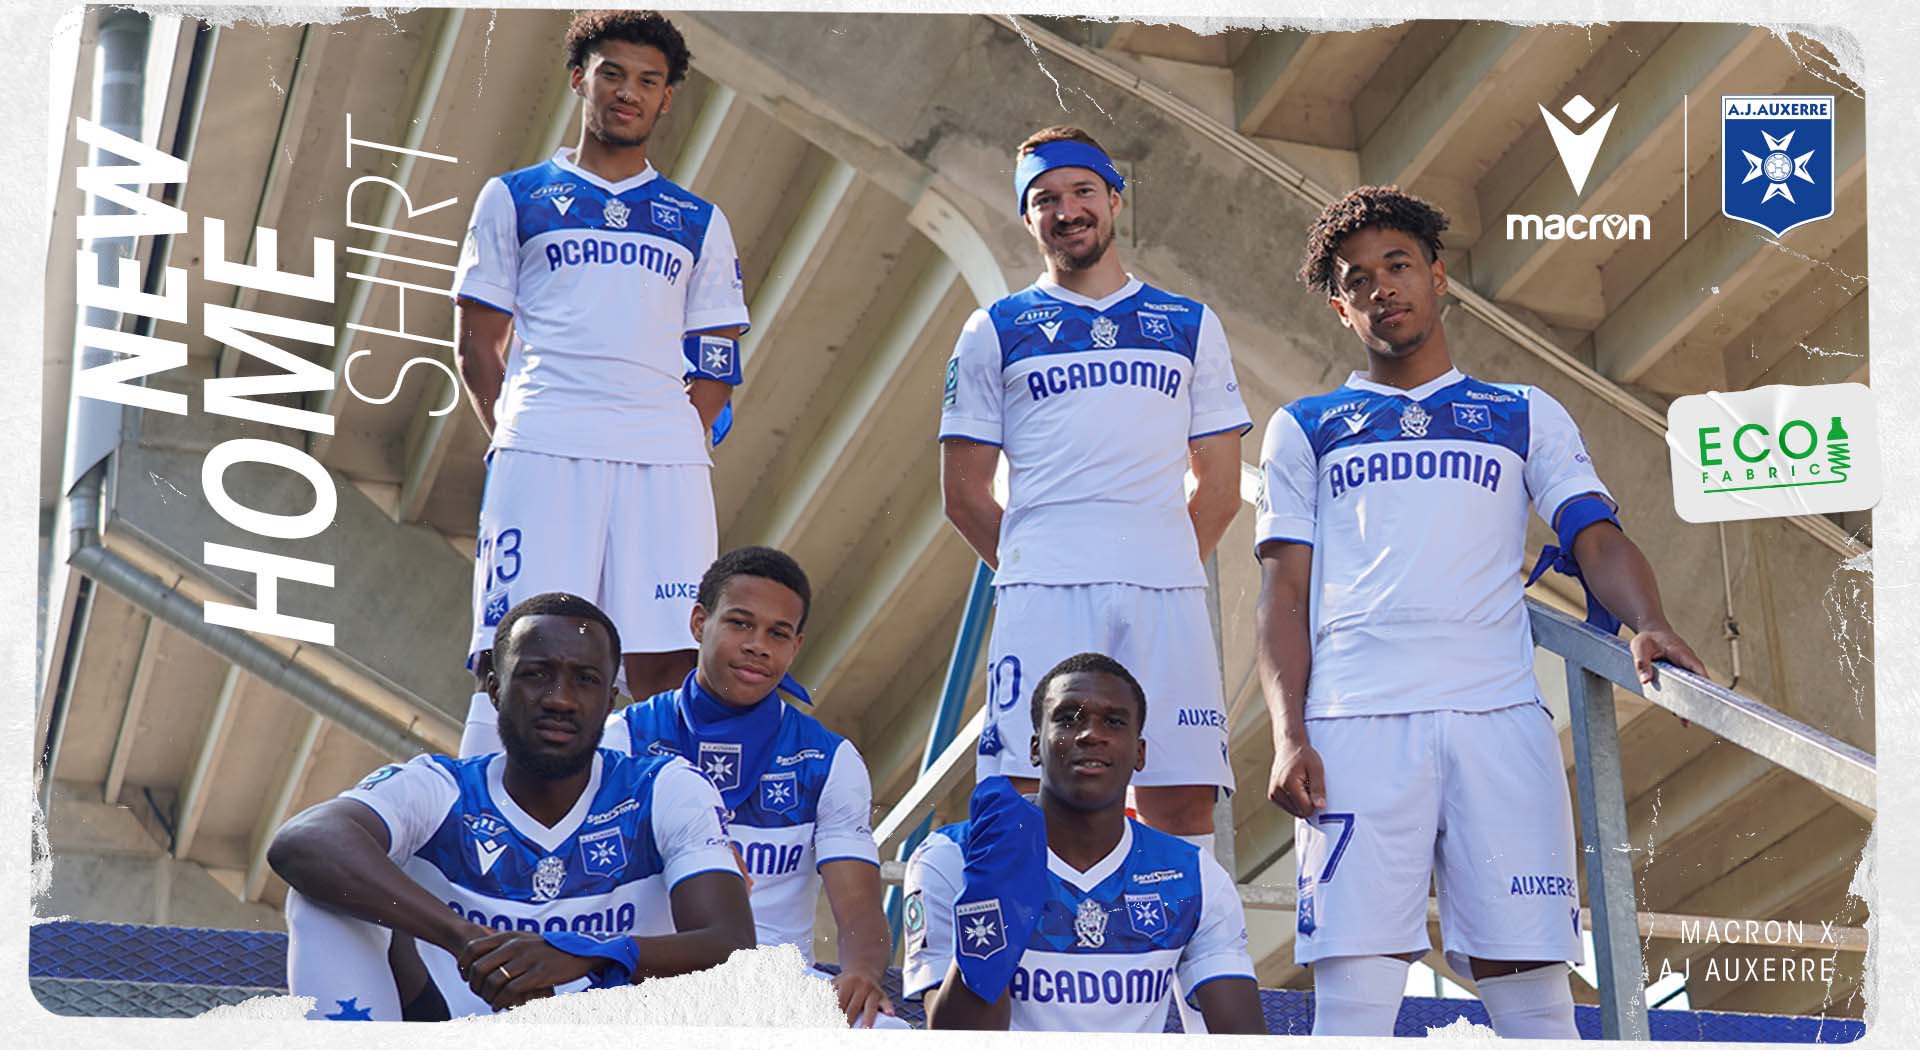 A.J. Auxerre reveal their new 23-24 Home kit